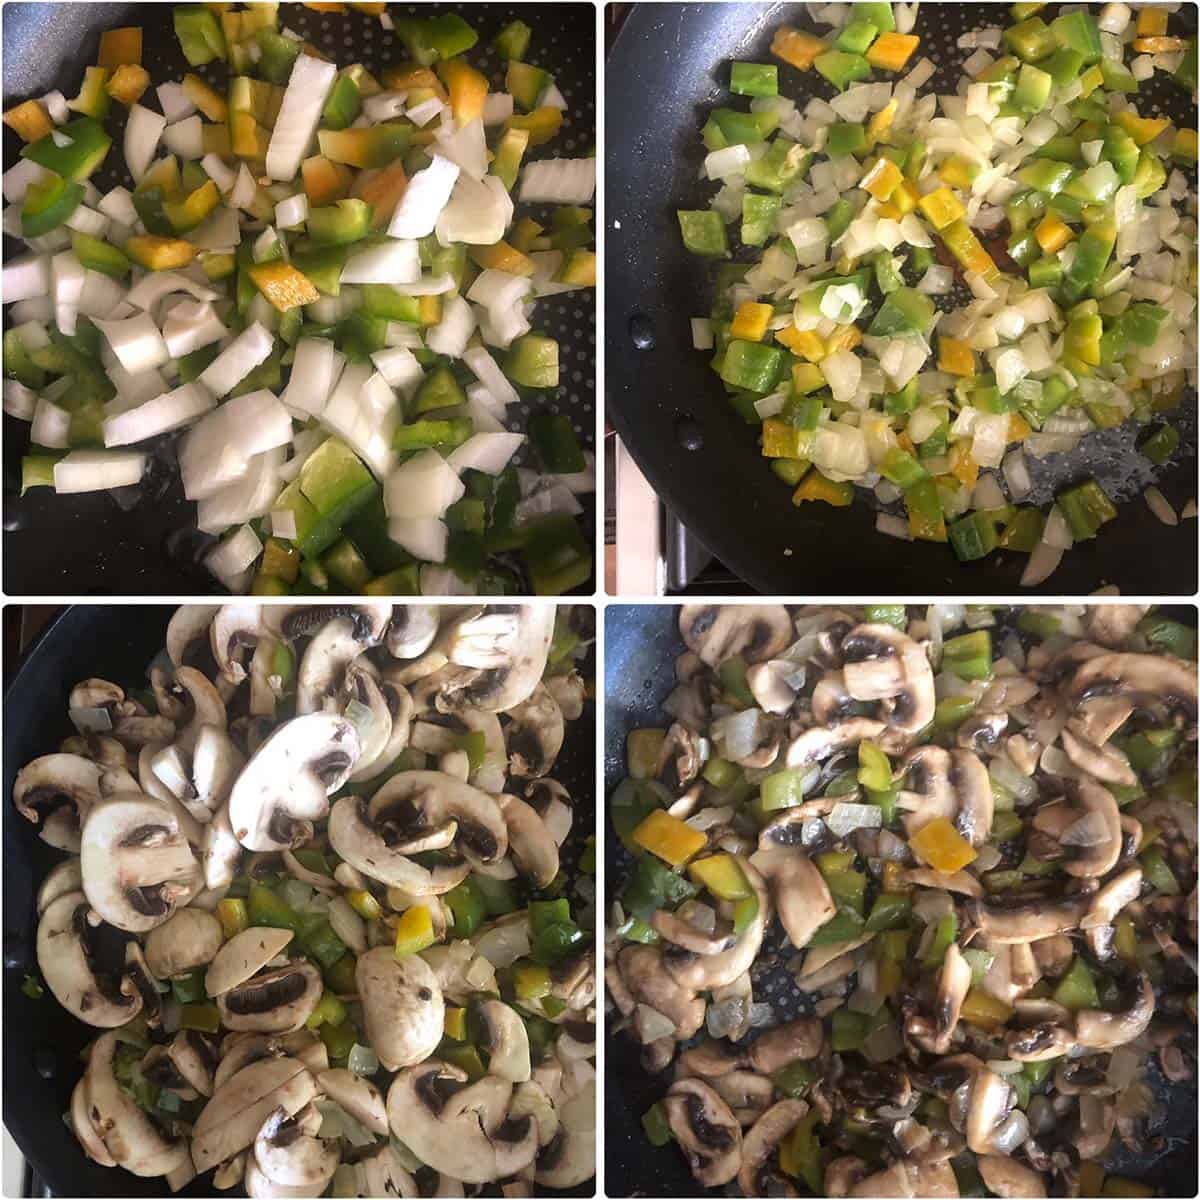 4 panel photo showing the sautéing of veggies in a pan.